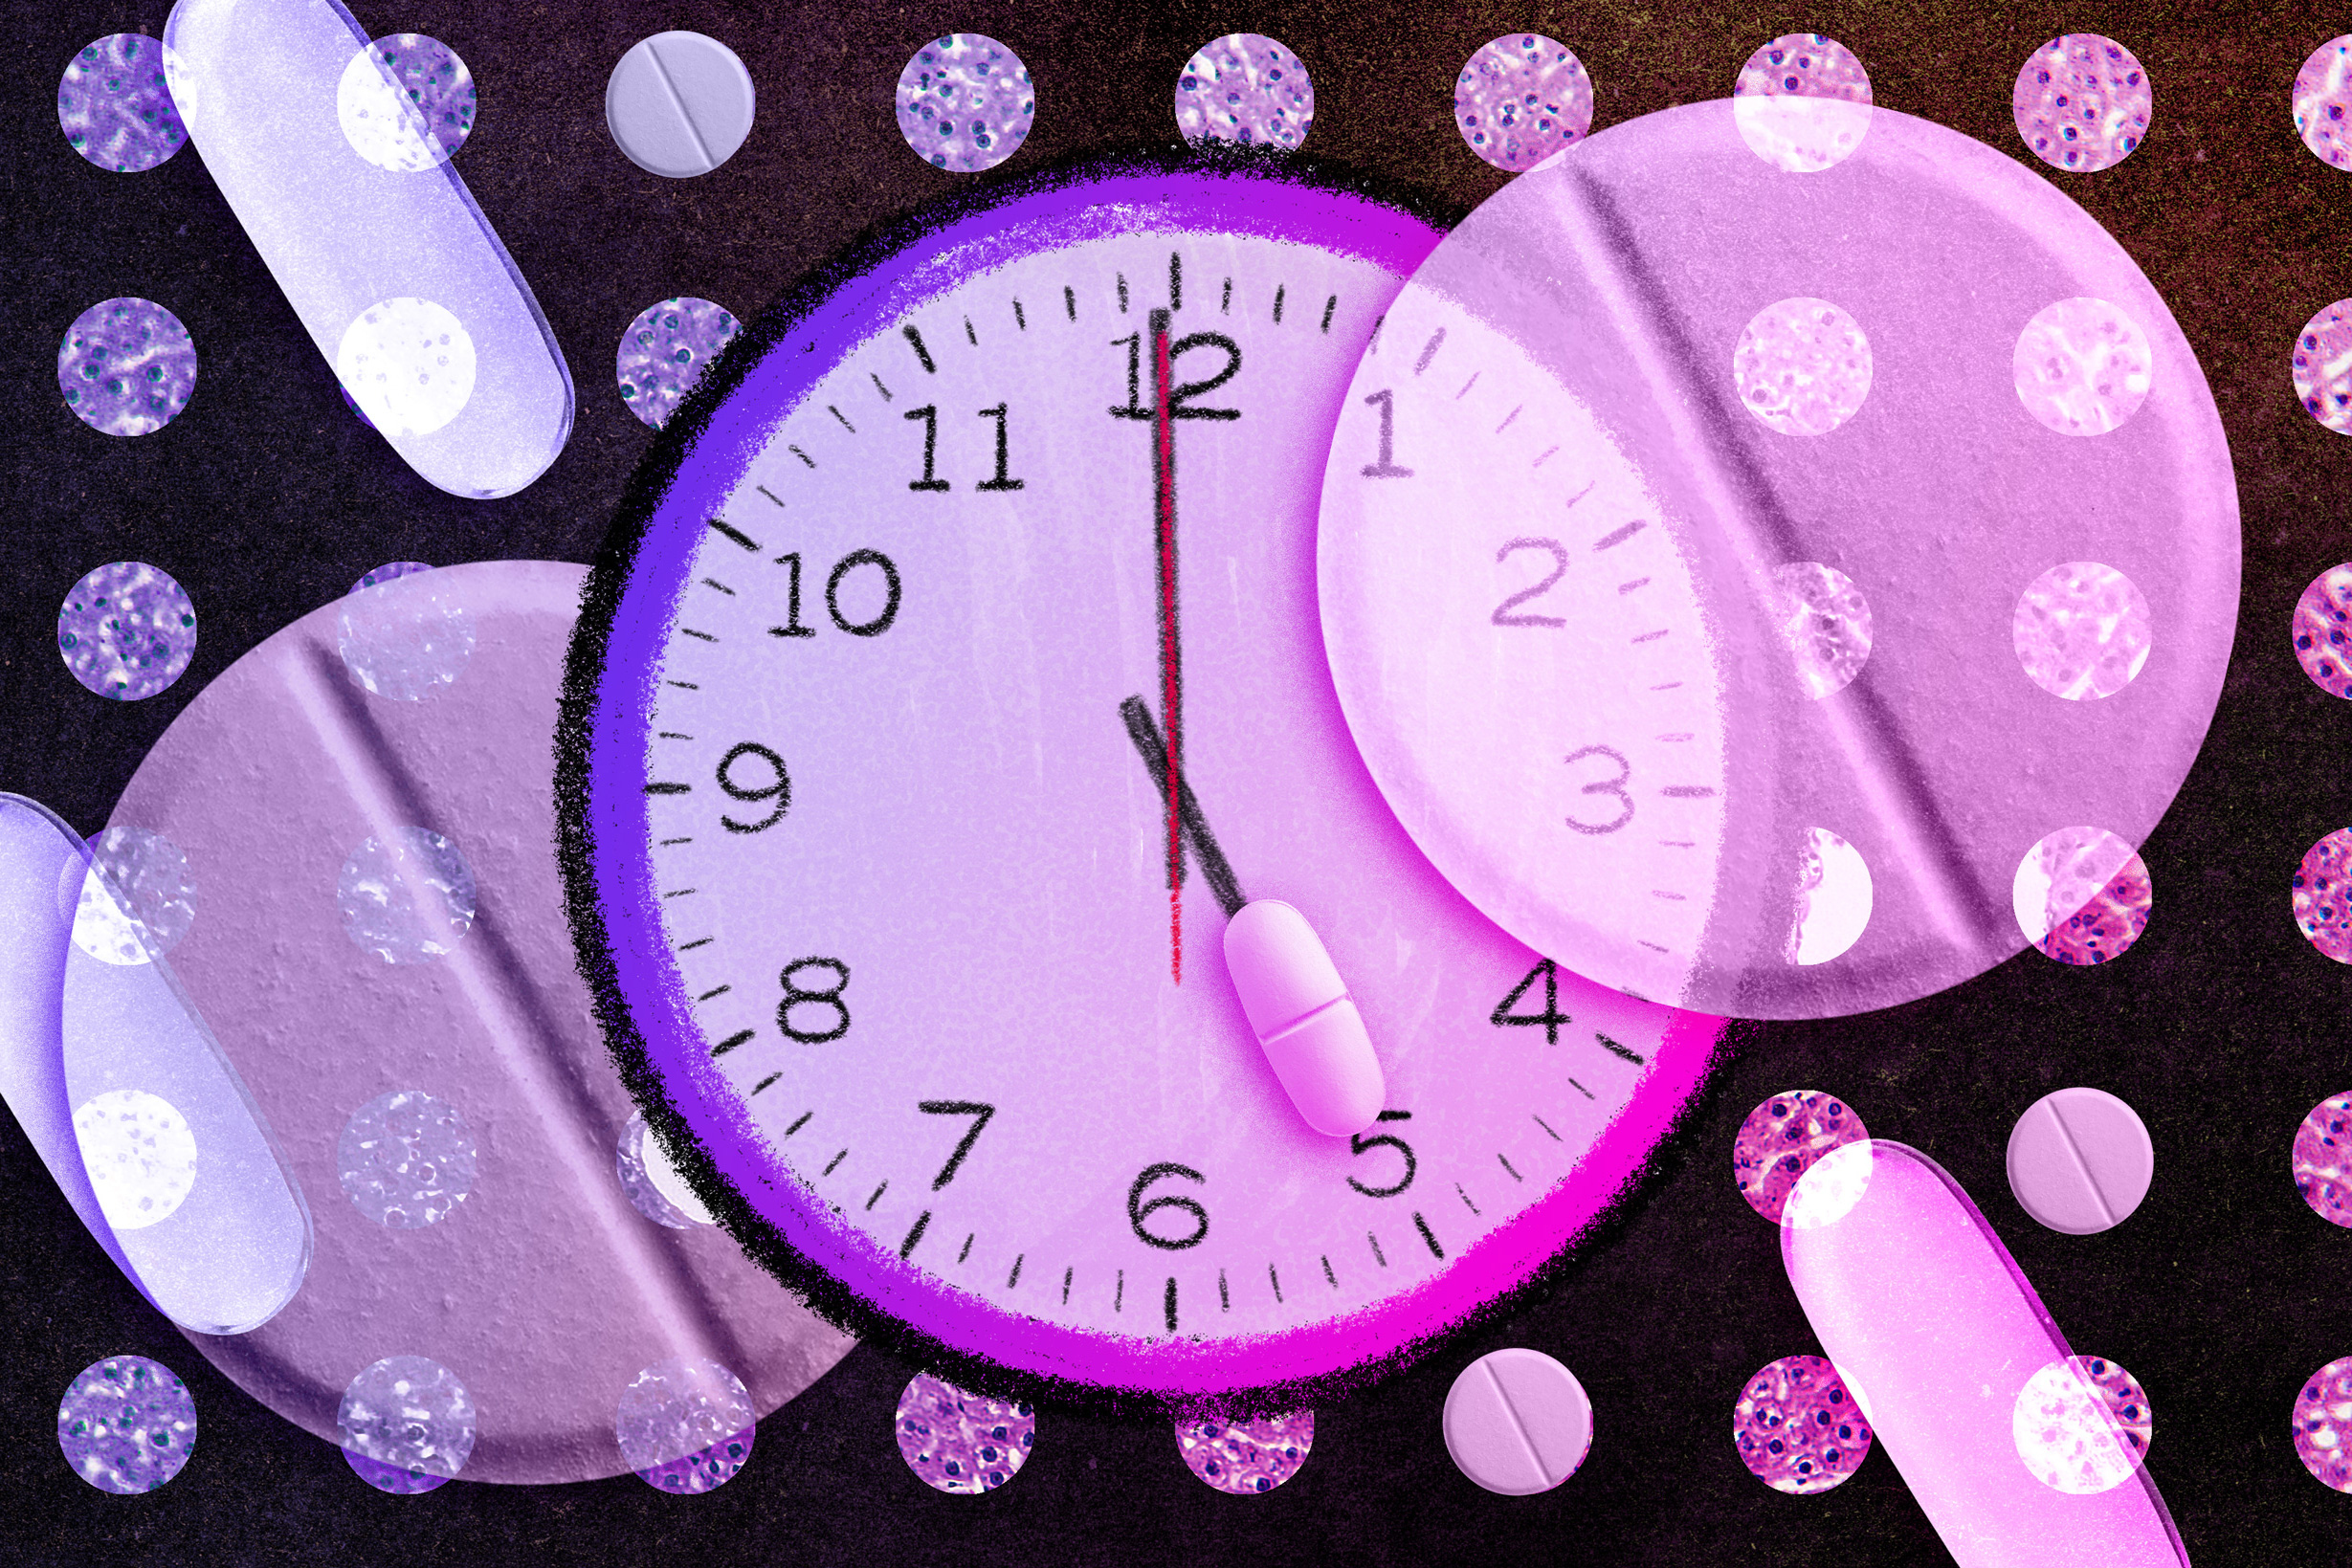 image of "Circadian rhythms can influence drugs’ effectiveness"